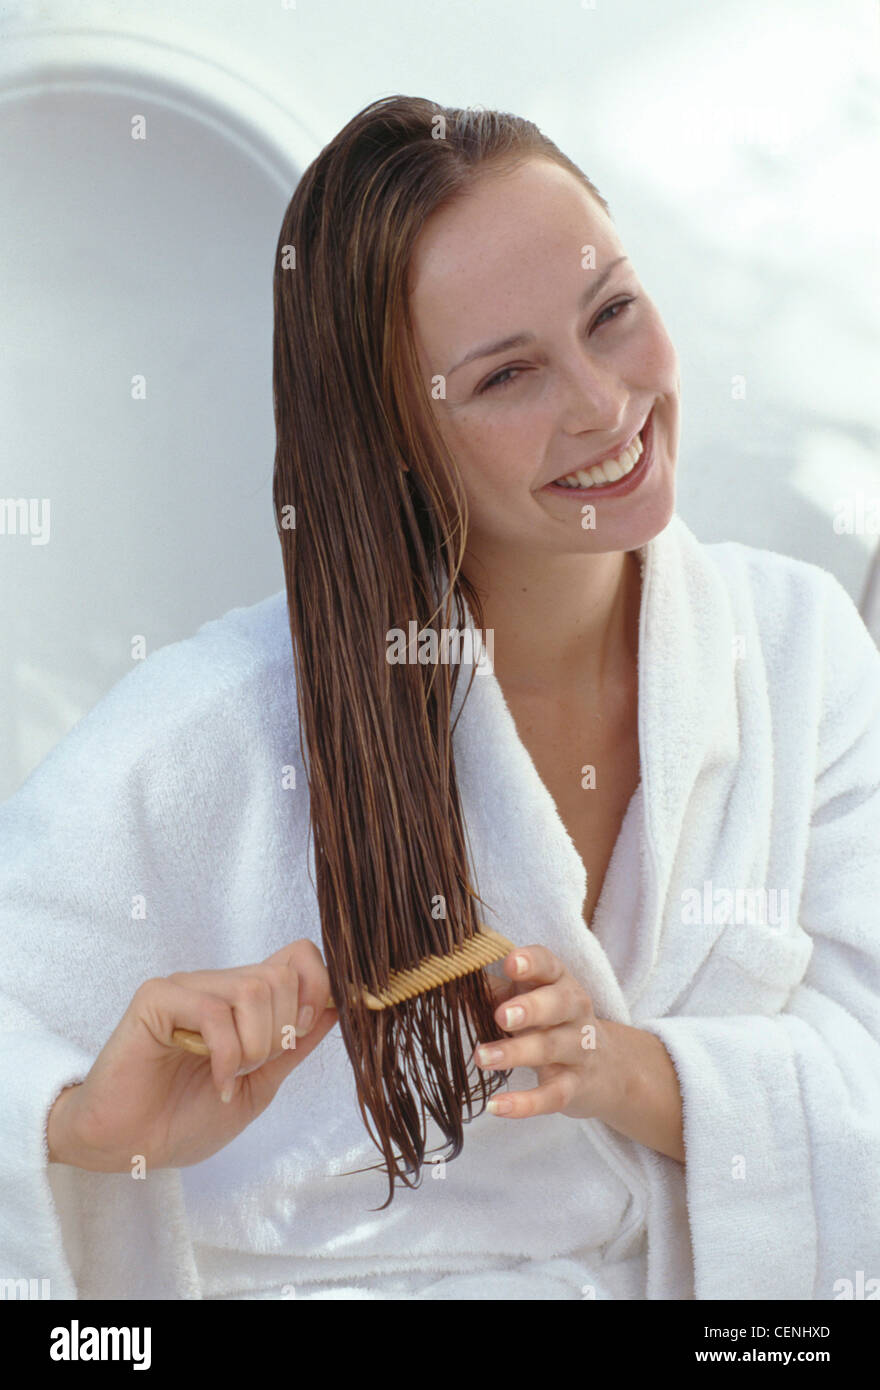 Female Long Wet Dark Blonde Hair Wearing White Towelling Dressing Gown Sitting Brushing Hair Comb Looking To Camera Smiling Stock Photo Alamy